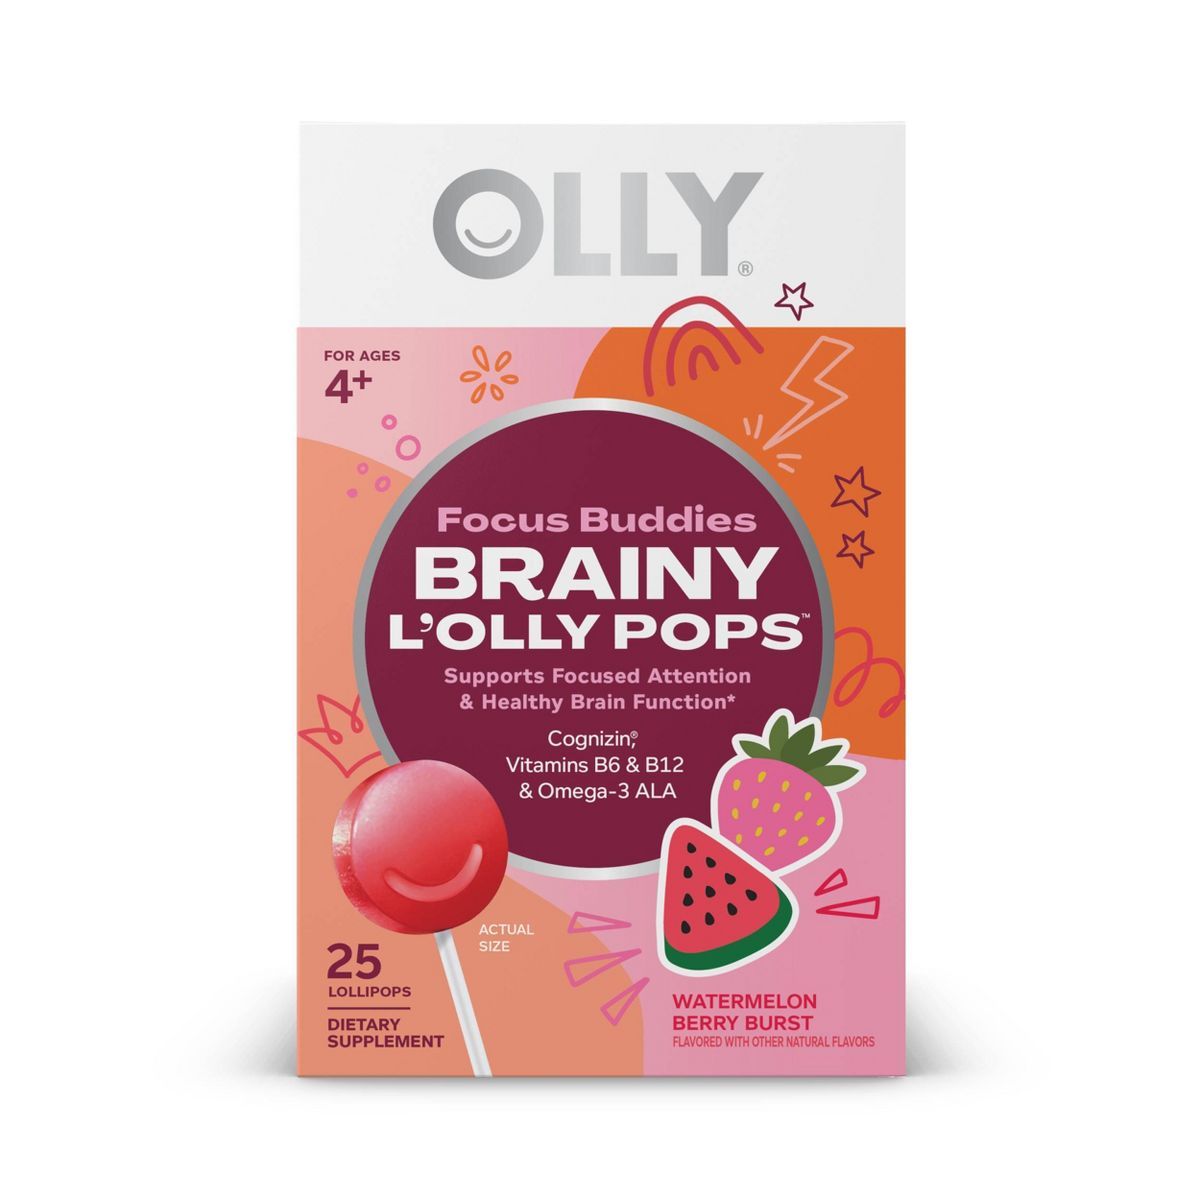 OLLY Brainy L'OLLY Pops - Focus Buddies - 25ct | Target